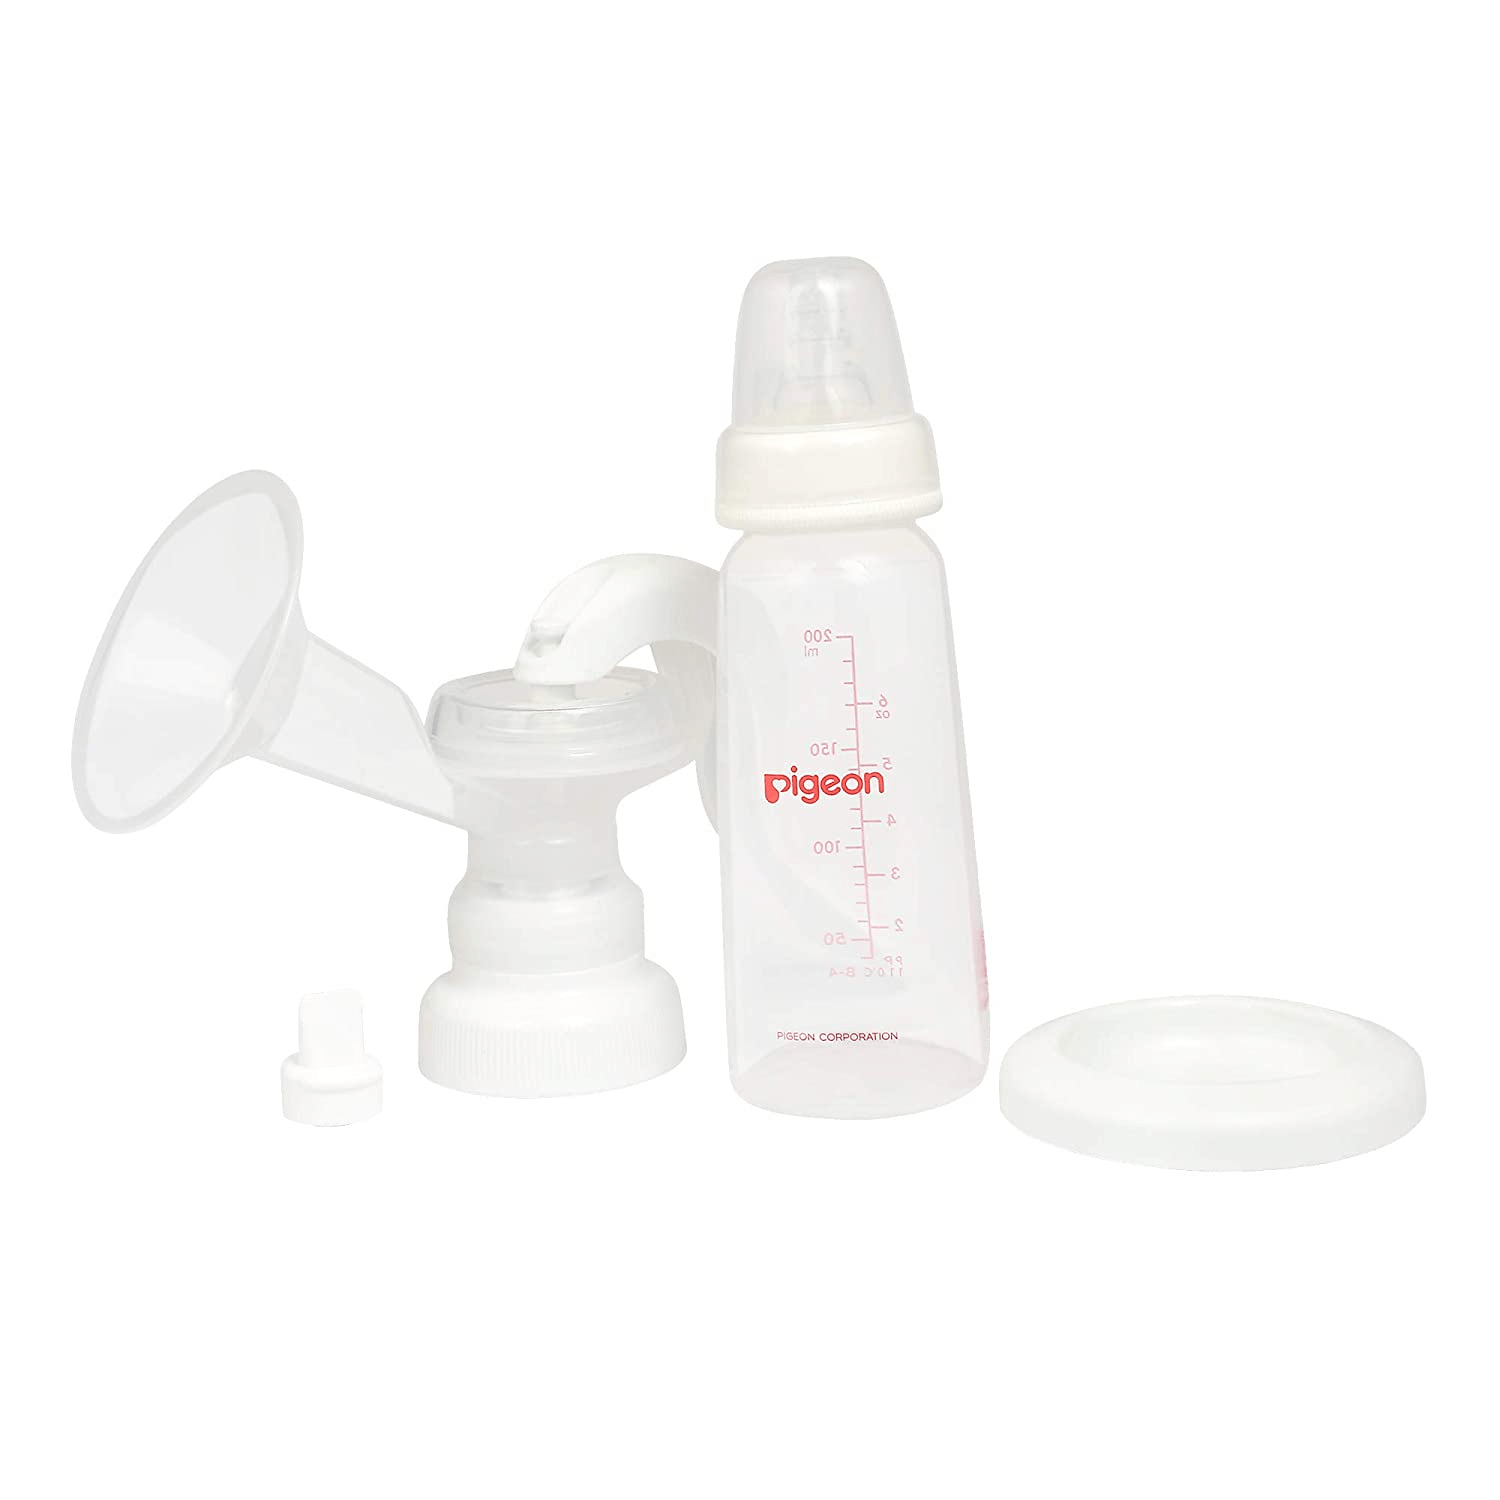 Pigeon Manual Breast Pump With 200 ml Bottle